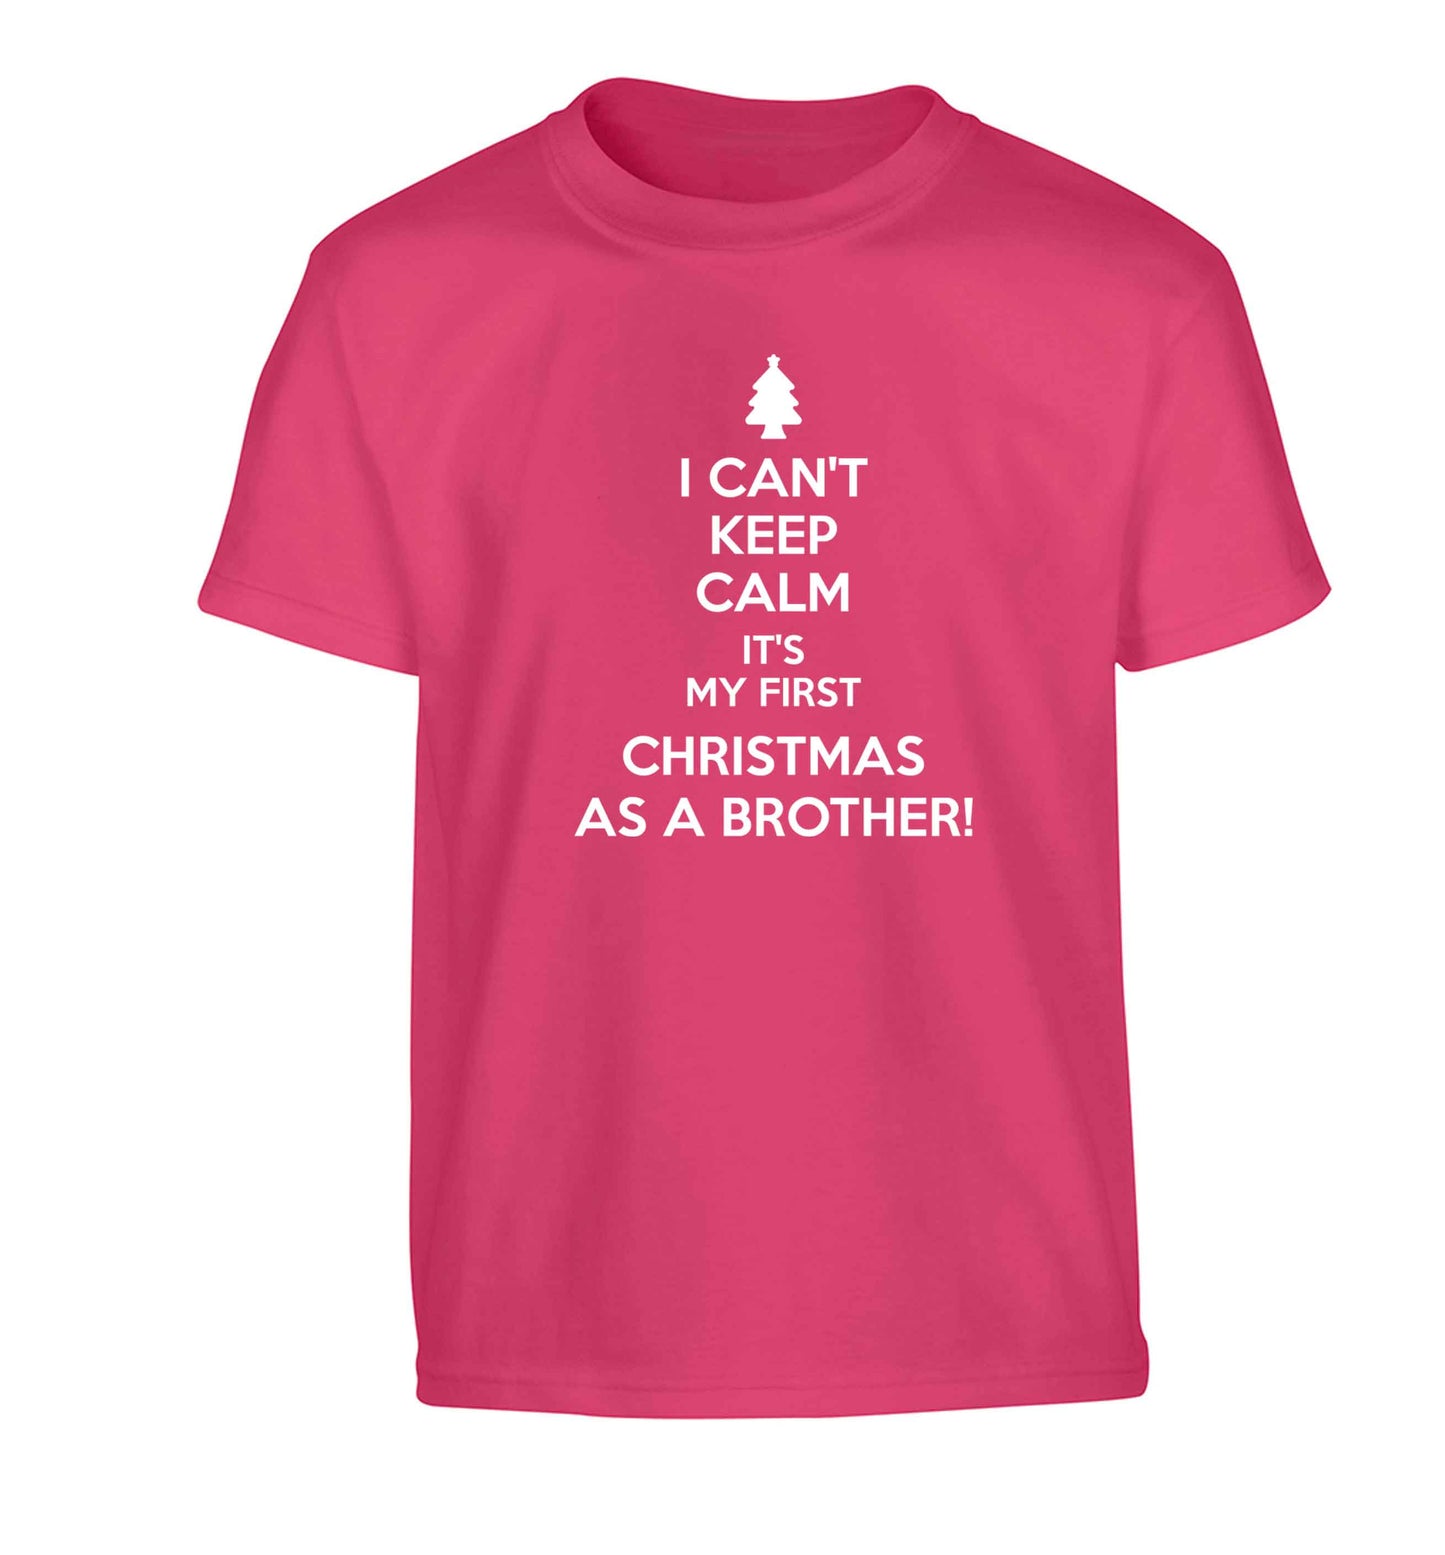 I can't keep calm it's my first Christmas as a brother! Children's pink Tshirt 12-13 Years